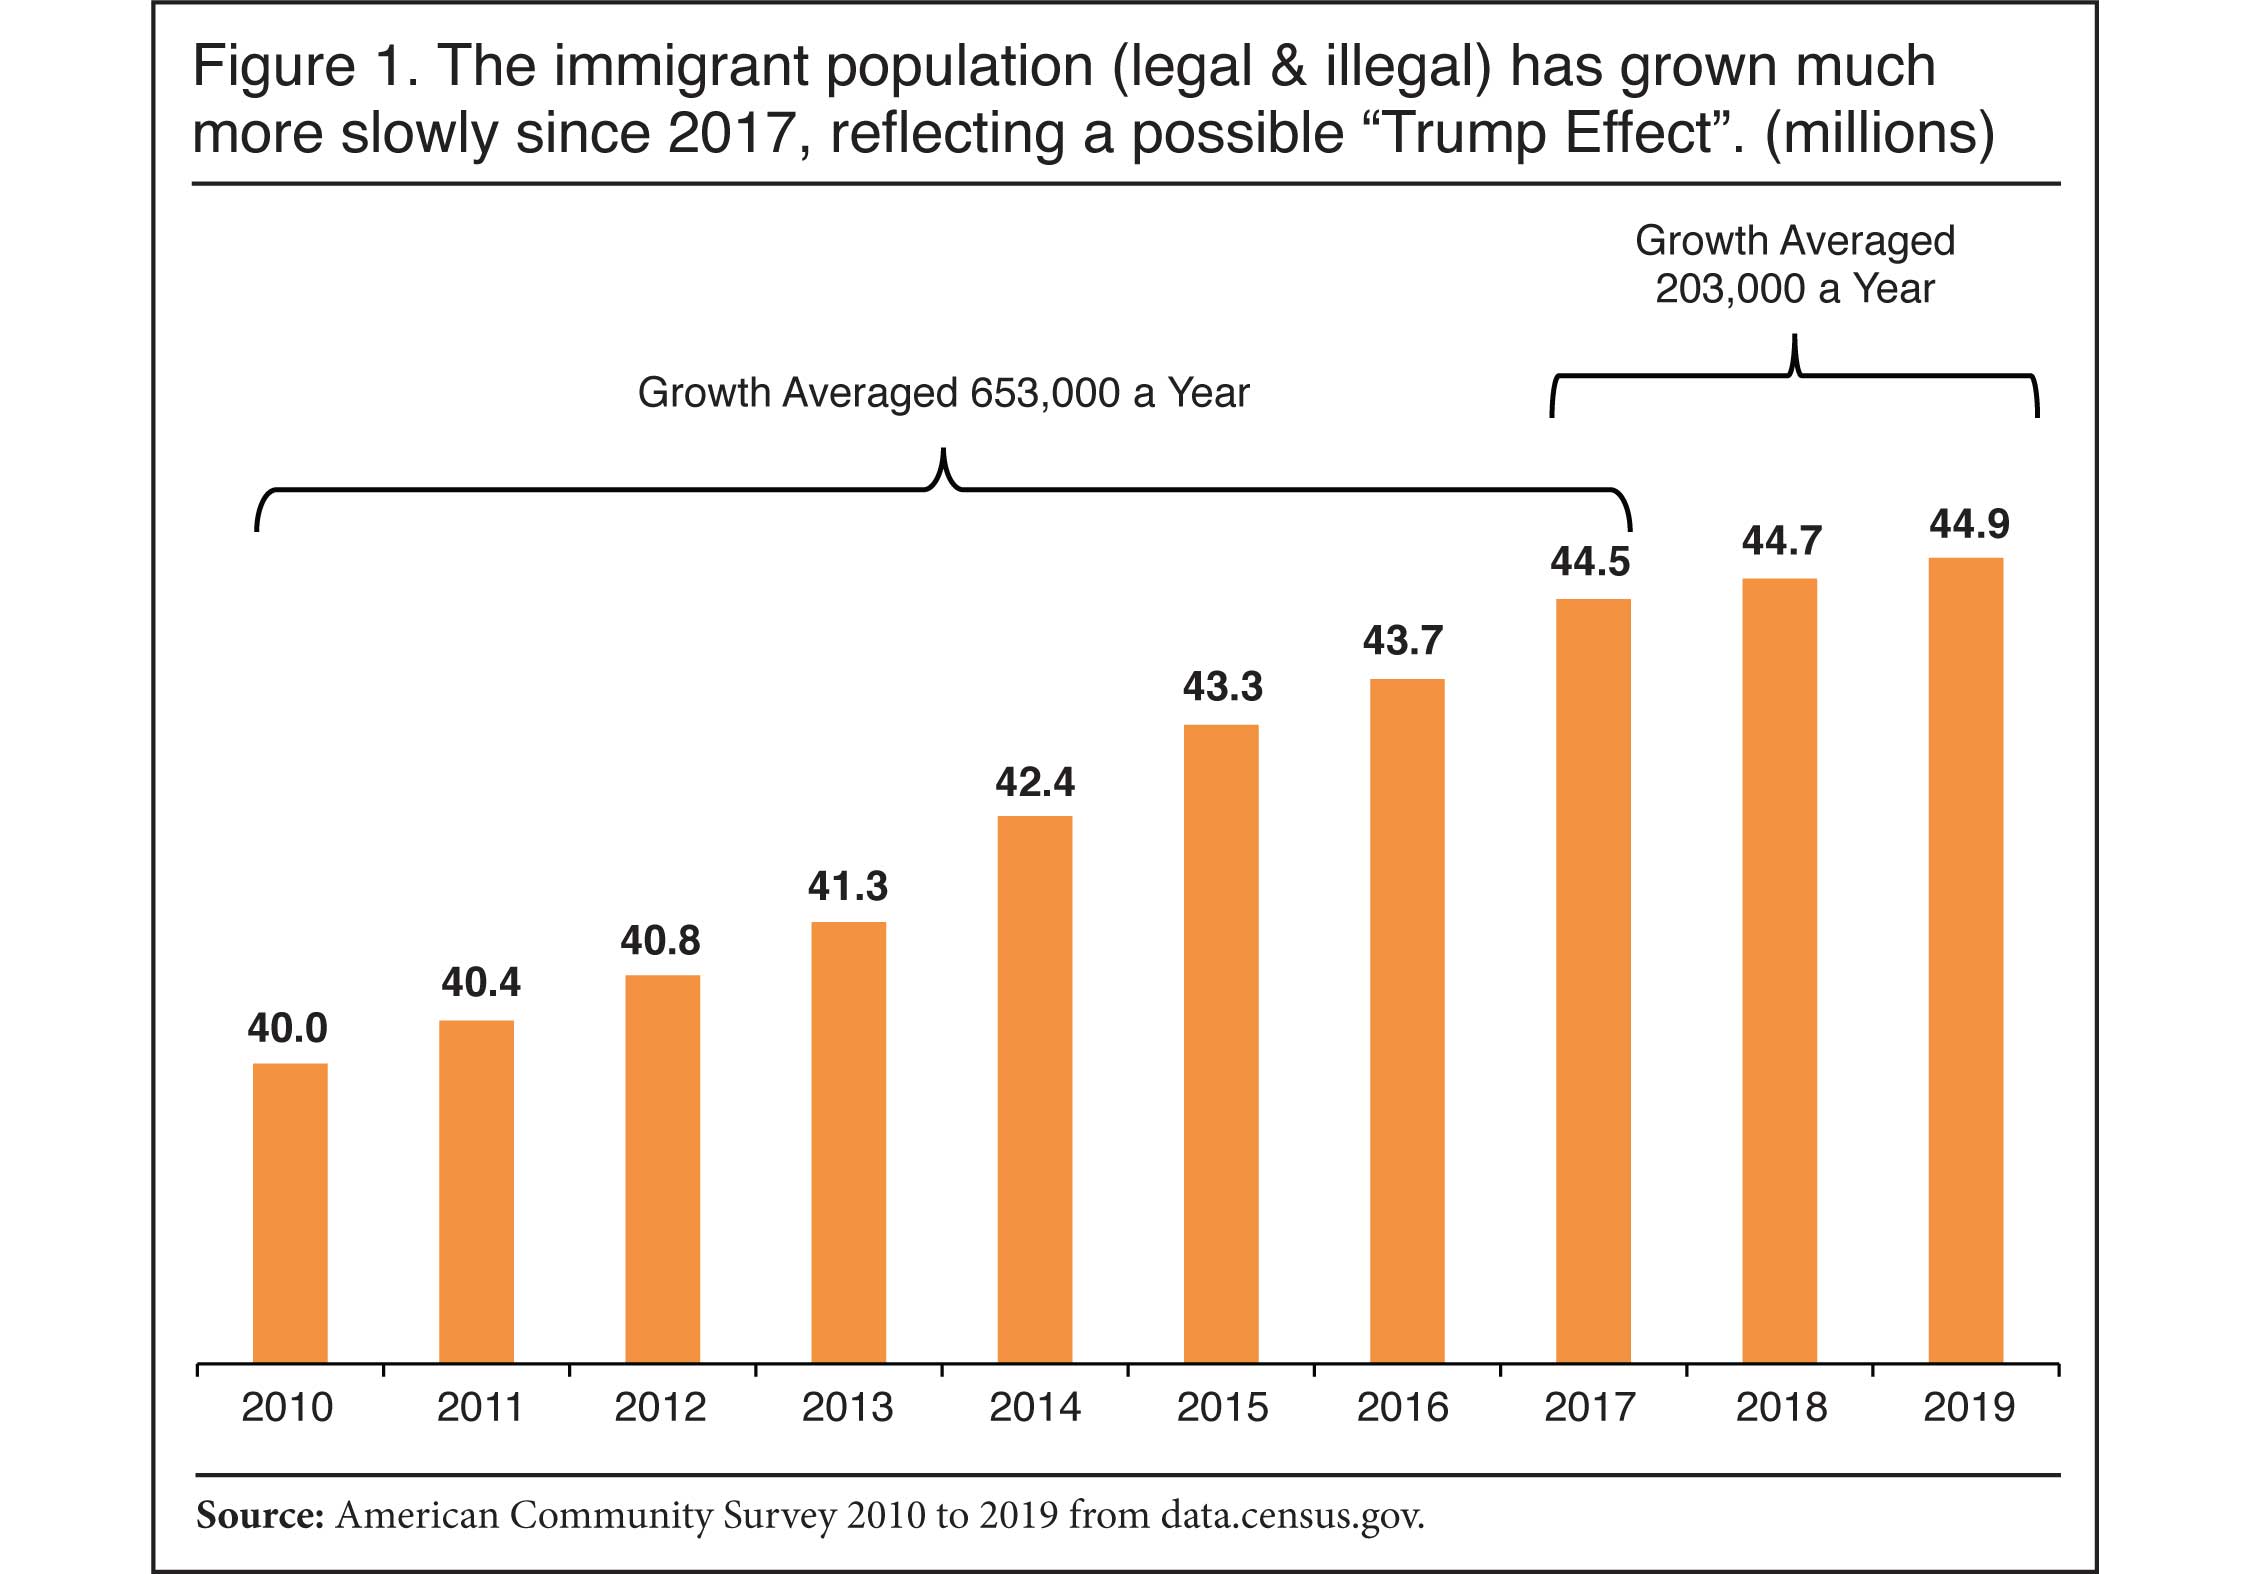 Graph: The immigrant population has grown much more slowly since 2017